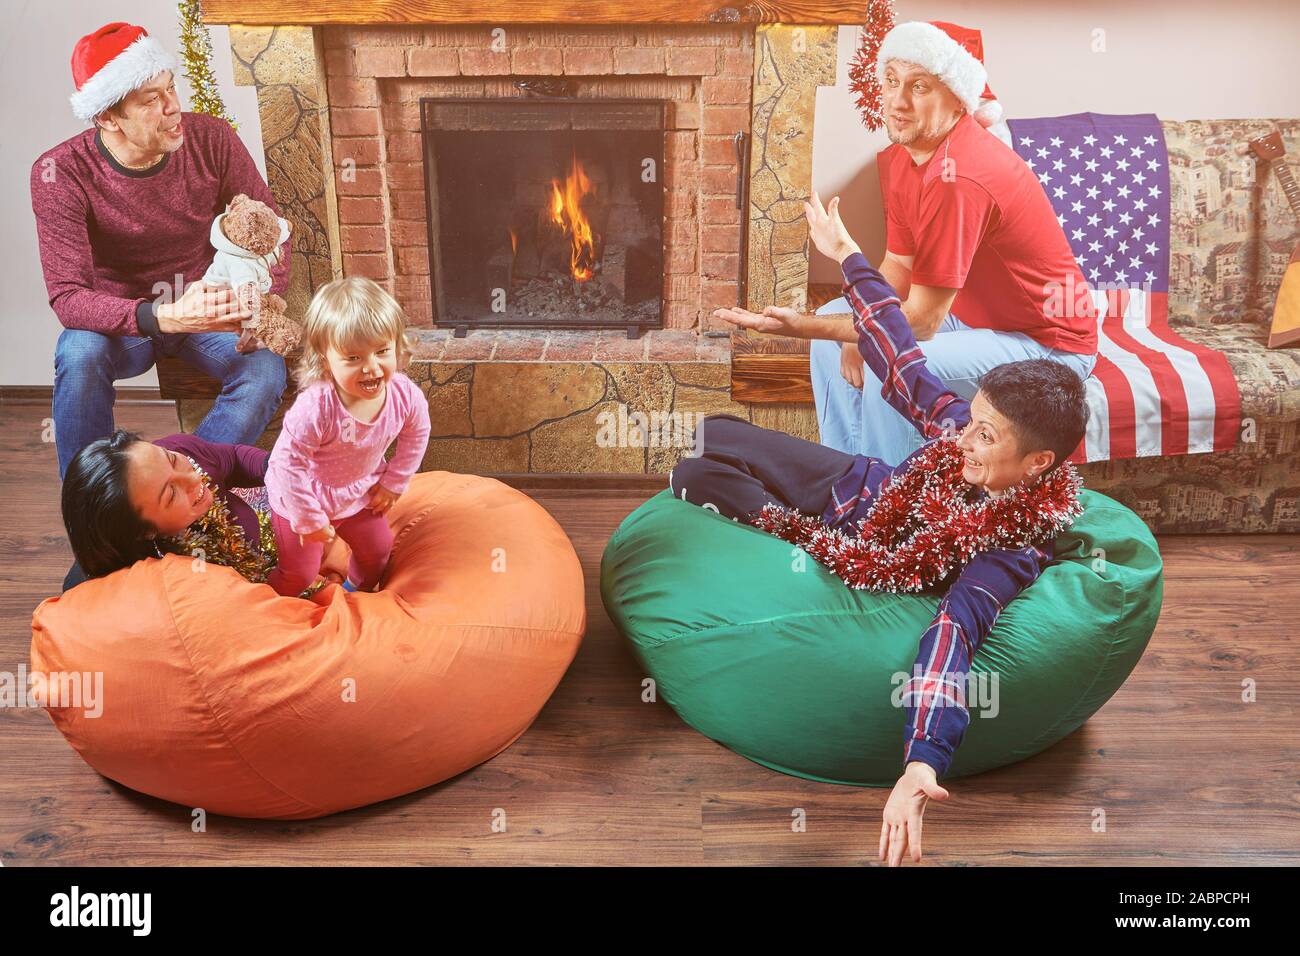 Group of people are celebrating Christmas at home in Santa's hats. Two couples of parents and their children are playing and smiling near fireplace. Stock Photo